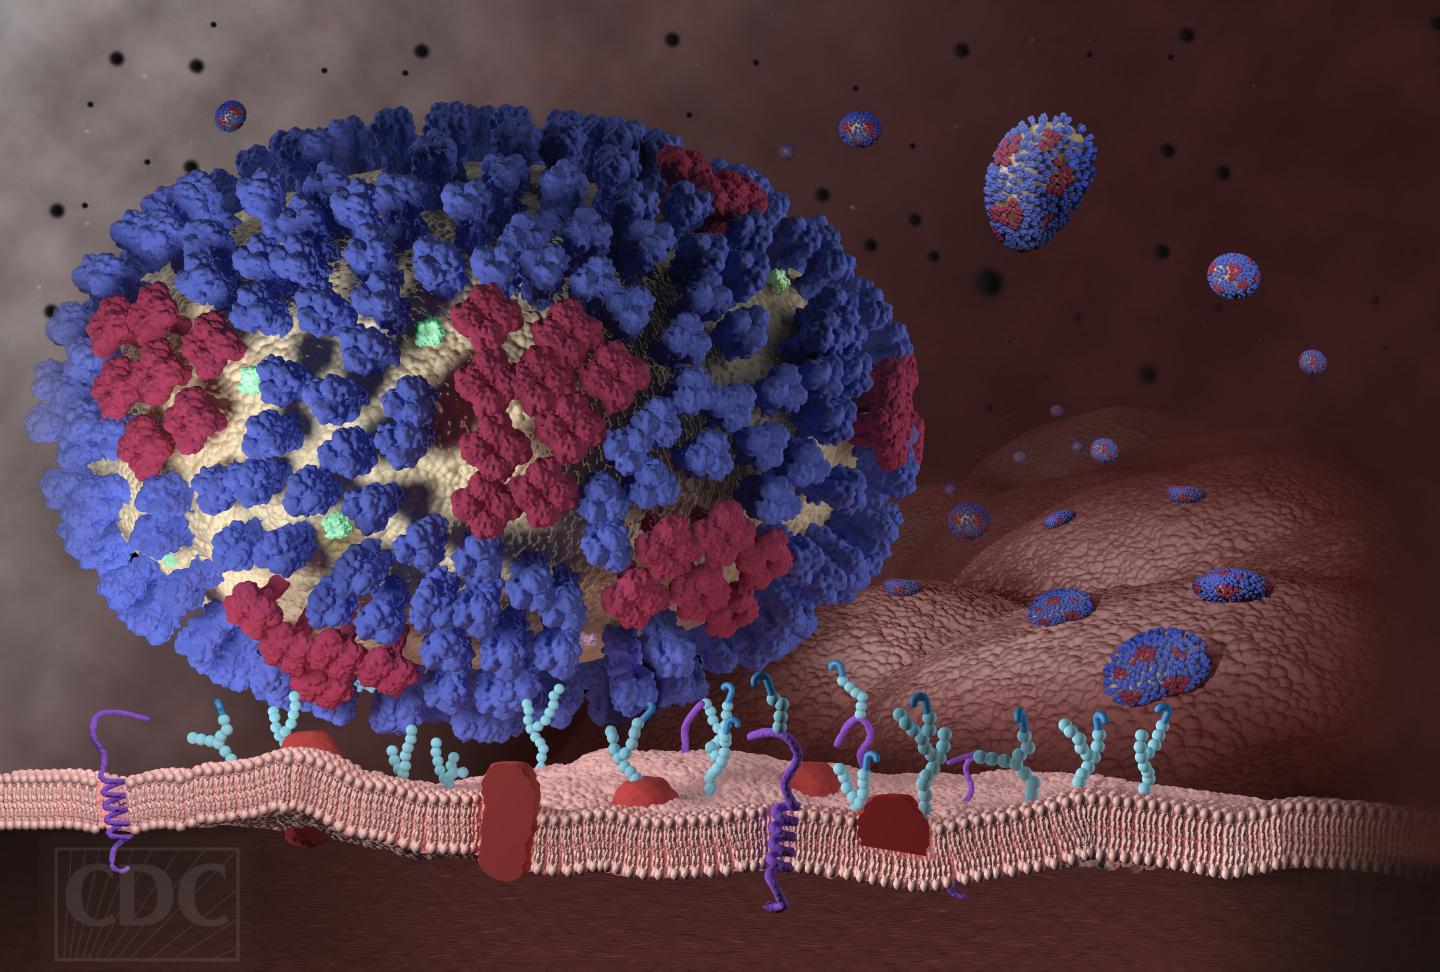 This image depicts the beginning stages of an influenza infection and shows what happens after the influenza viruses enter the human body. Influenza, a new study has shown, induces and suppresses an antiviral RNA interference mechanism not just in “lower” organisms, as had been demonstrated in earlier studies, but in humans, too. [CDC]